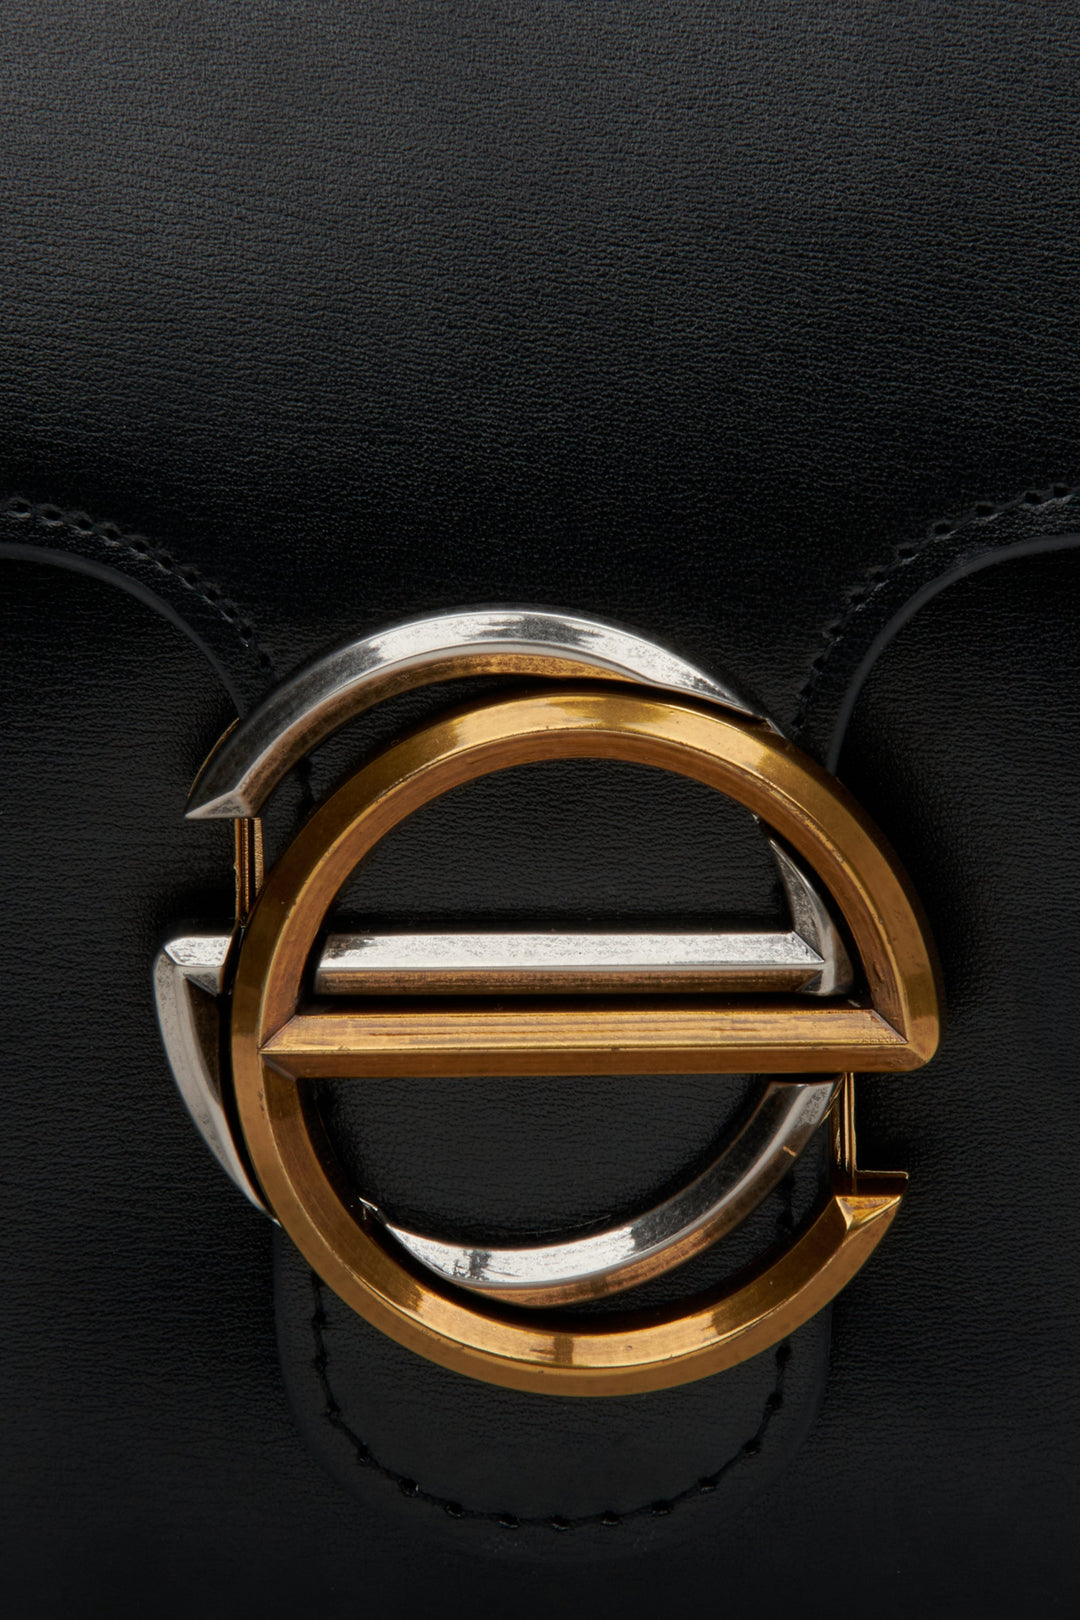 Women's small black handbag with gold hardware made of leather by Estro - close-up on a logo.